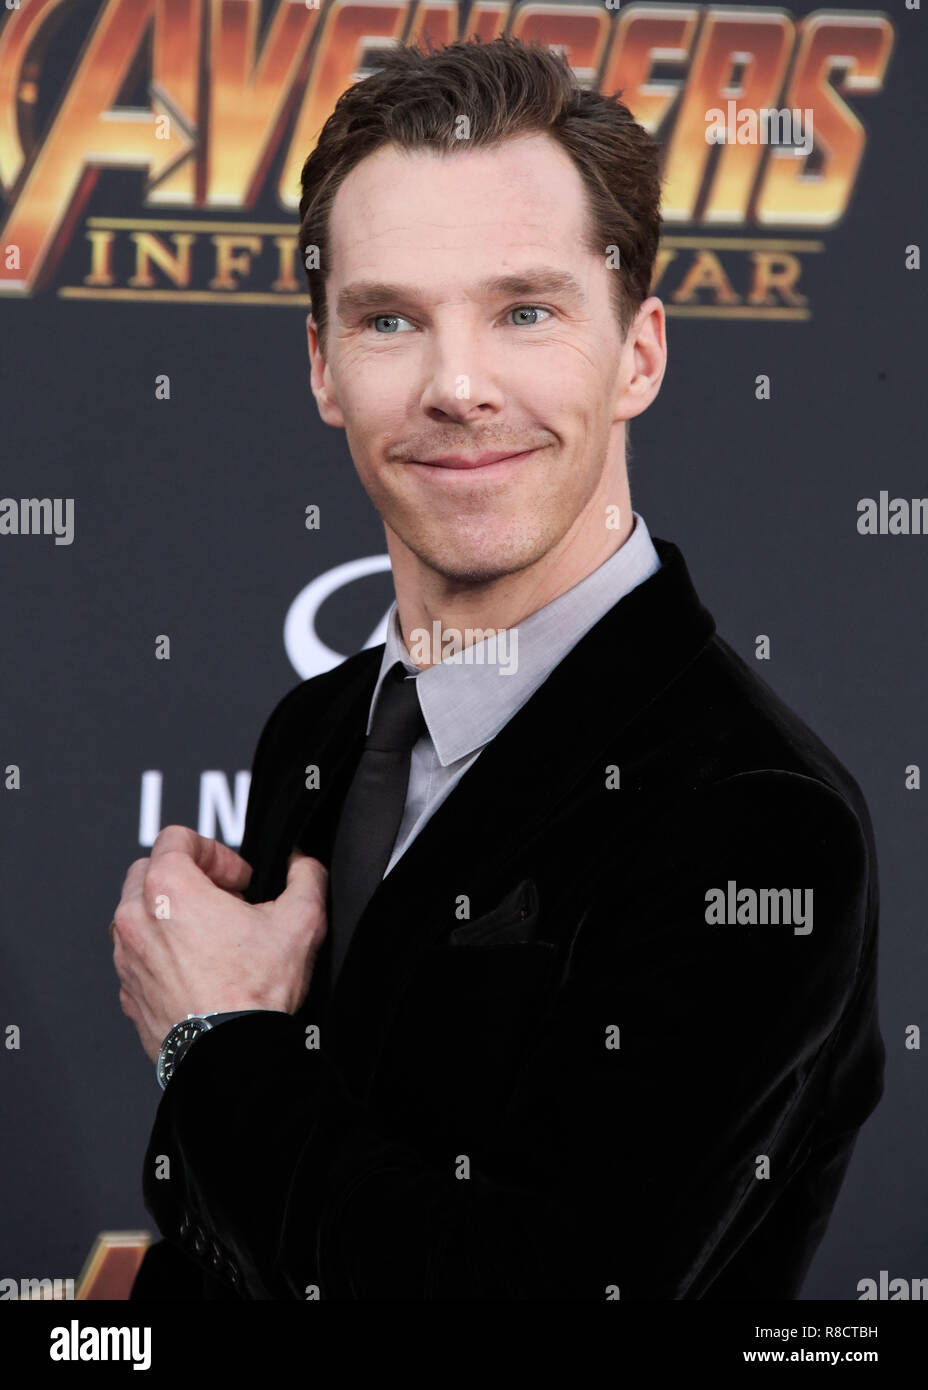 HOLLYWOOD, LOS ANGELES, CA, USA - APRIL 23: Benedict Cumberbatch at the World Premiere Of Disney And Marvel's 'Avengers: Infinity War' held at the El Capitan Theatre, Dolby Theatre and TCL Chinese Theatre IMAX on April 23, 2018 in Hollywood, Los Angeles, California, United States. (Photo by Xavier Collin/Image Press Agency) Stock Photo